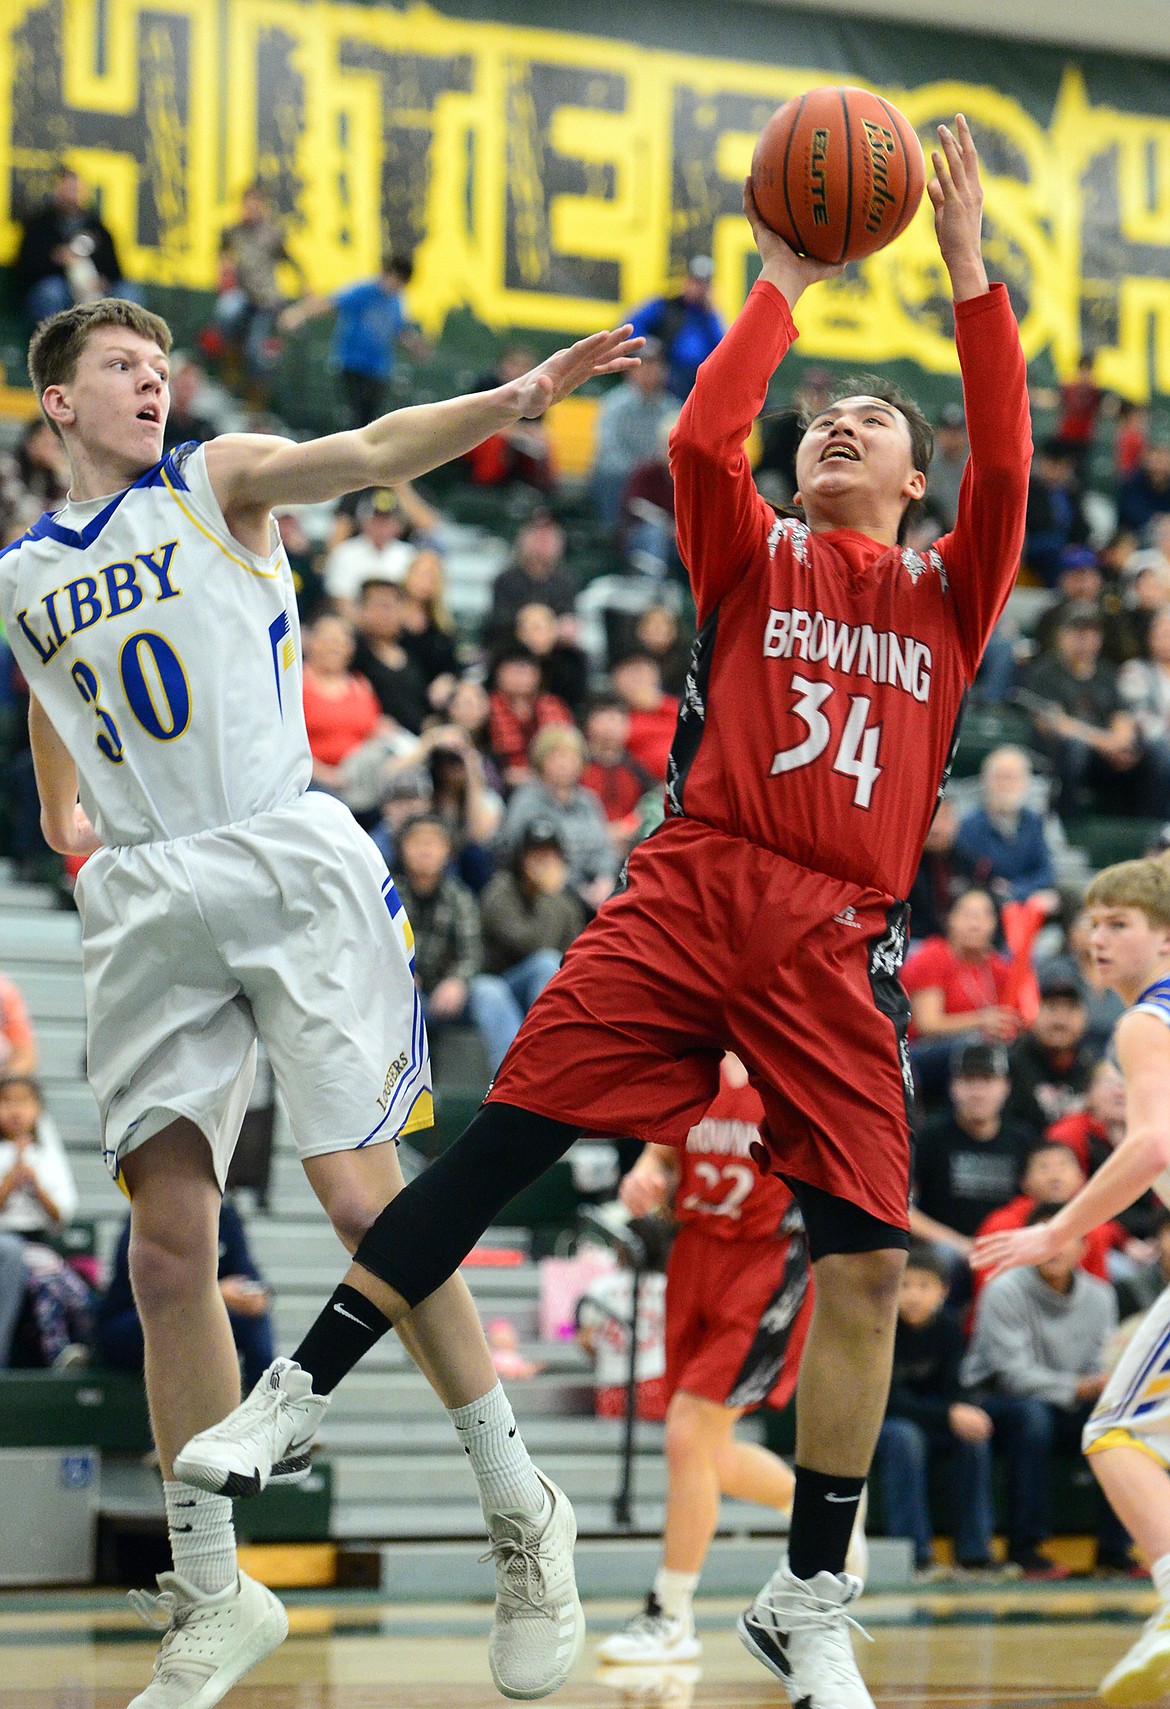 Browning's Deion Mad Plume (34) shoots with Libby's Caden Williams (30) defending at Whitefish High School on Friday. (Casey Kreider/Daily Inter Lake)